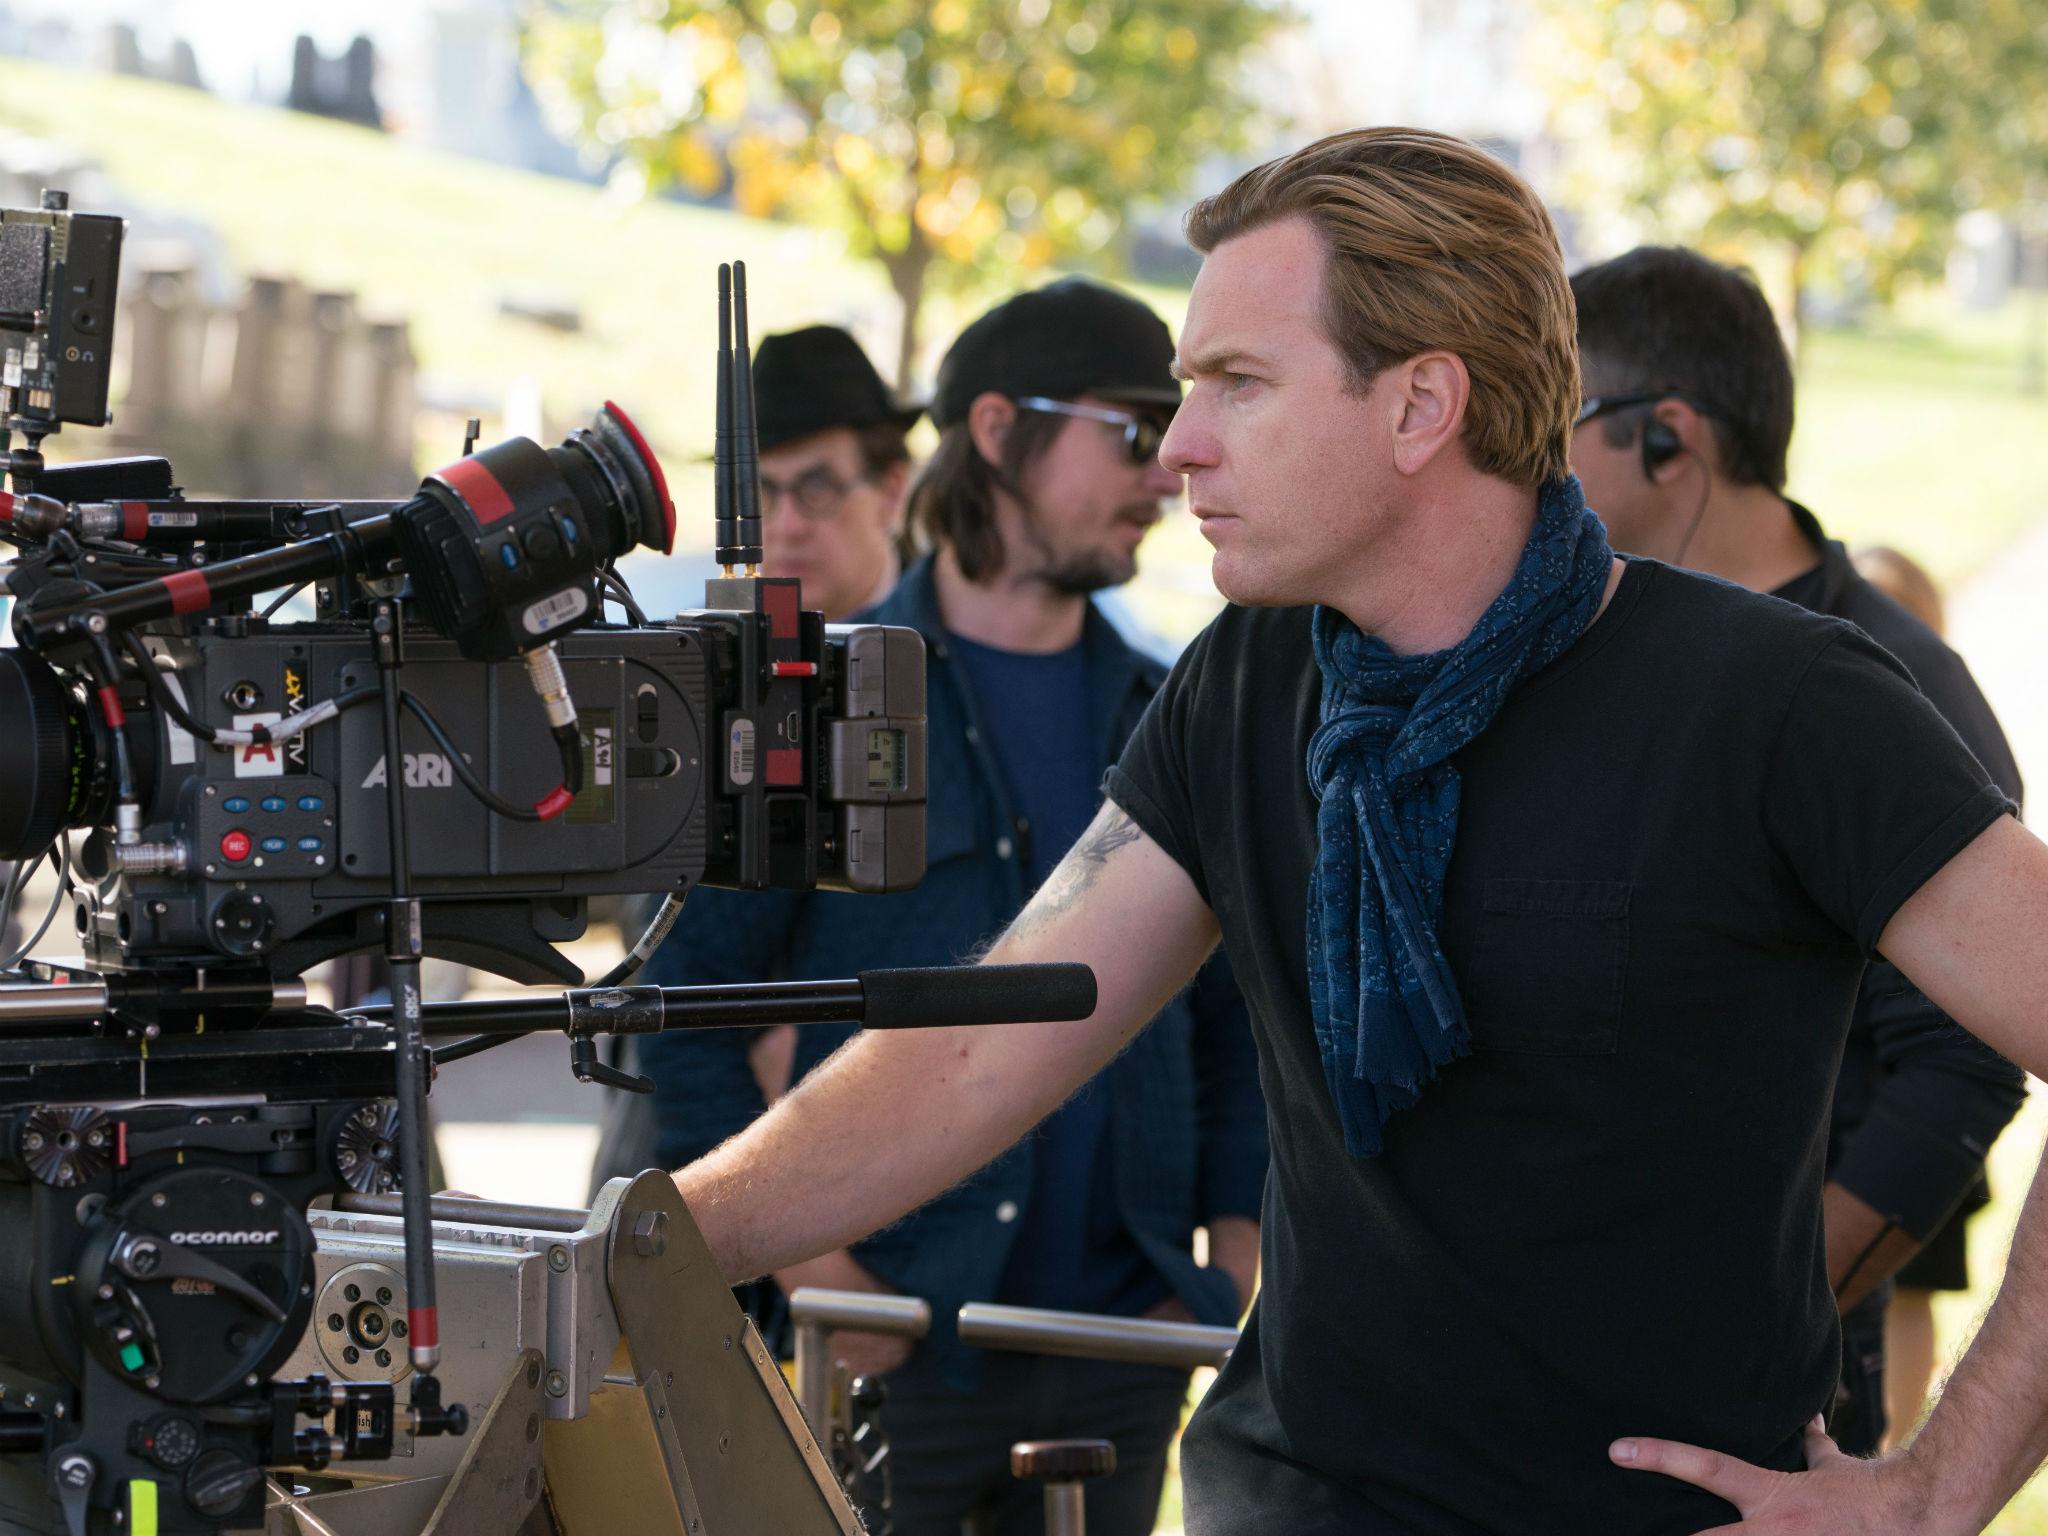 American Pastoral is Ewan McGregor's directorial debut but he also stars in the film with Dakota Fanning and Jennifer Connelly